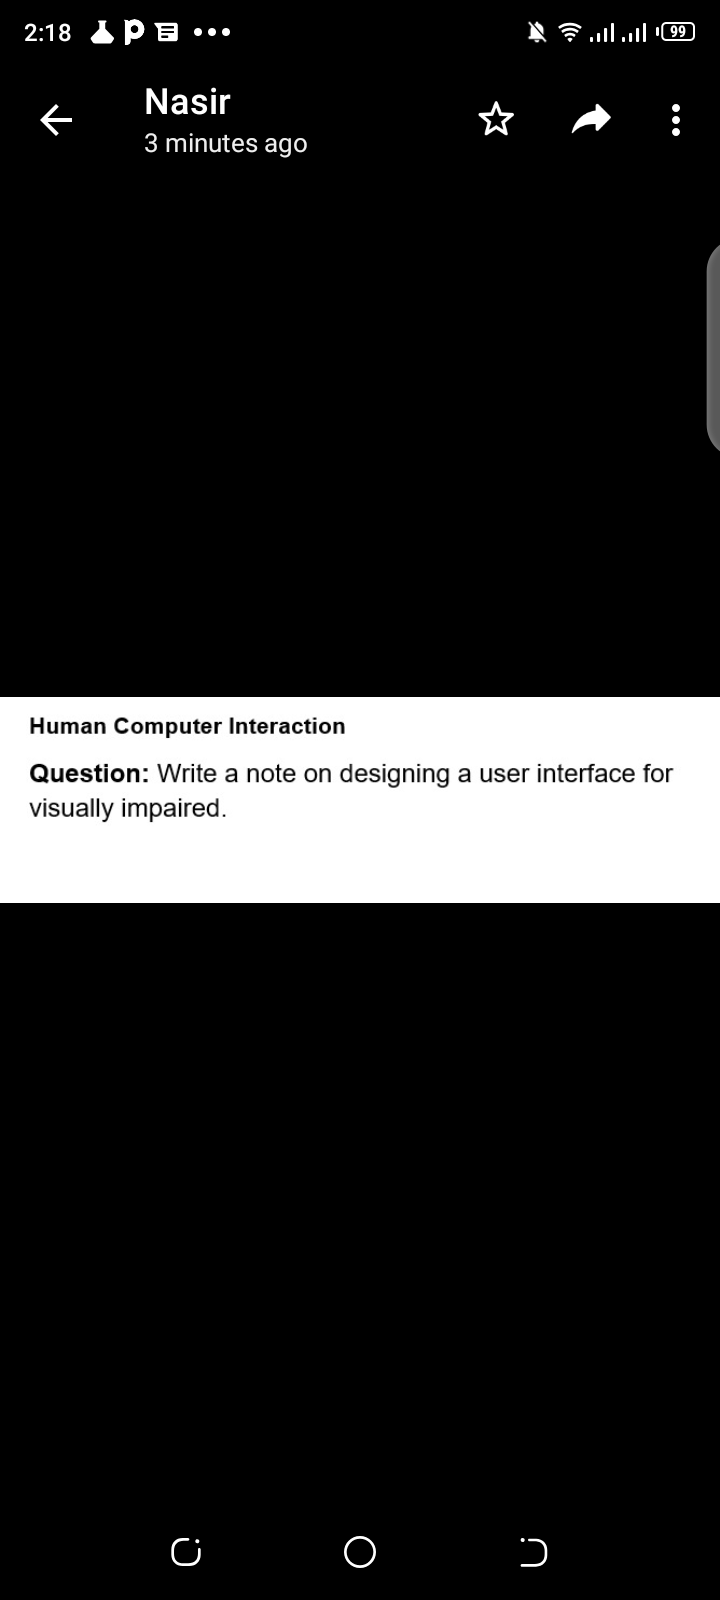 2:18 IP a
שי |ח. יו.
•..
Nasir
☆
3 minutes
ago
Human Computer Interaction
Question: Write a note on designing a user interface for
visually impaired.
